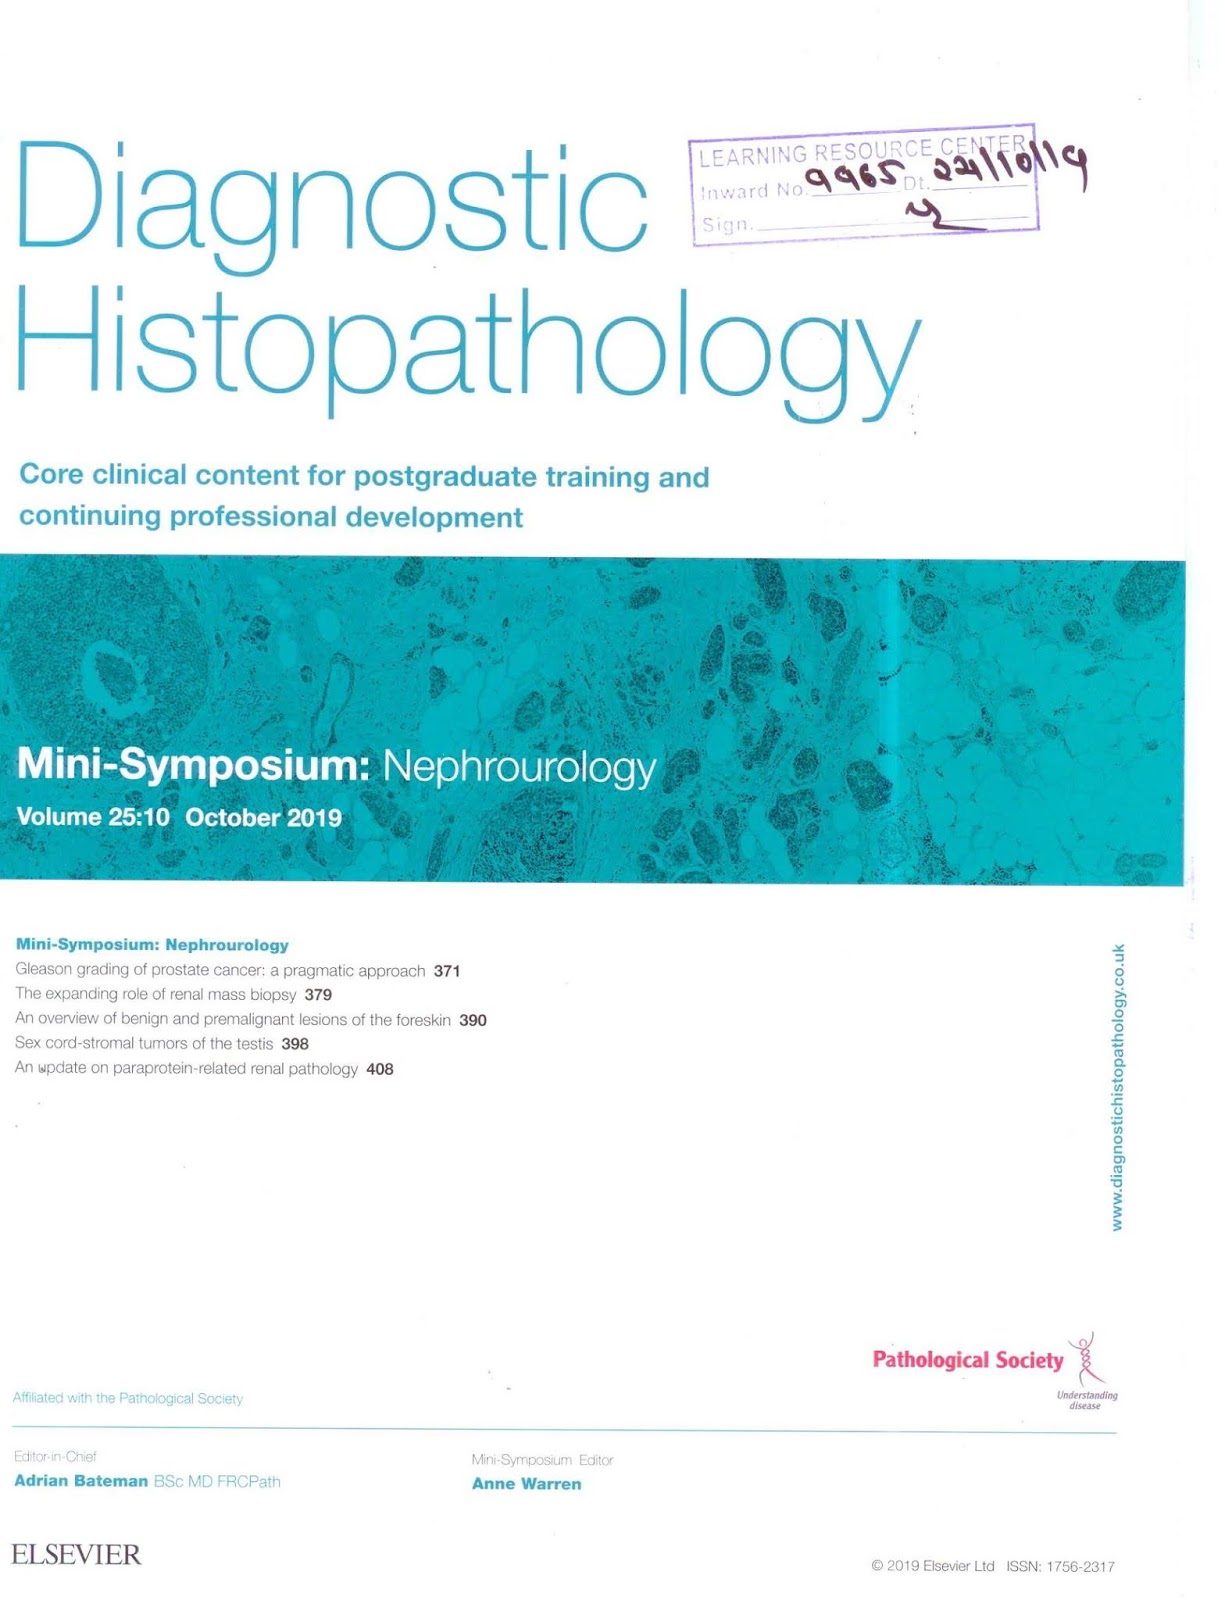 https://www.sciencedirect.com/journal/diagnostic-histopathology/vol/25/issue/10